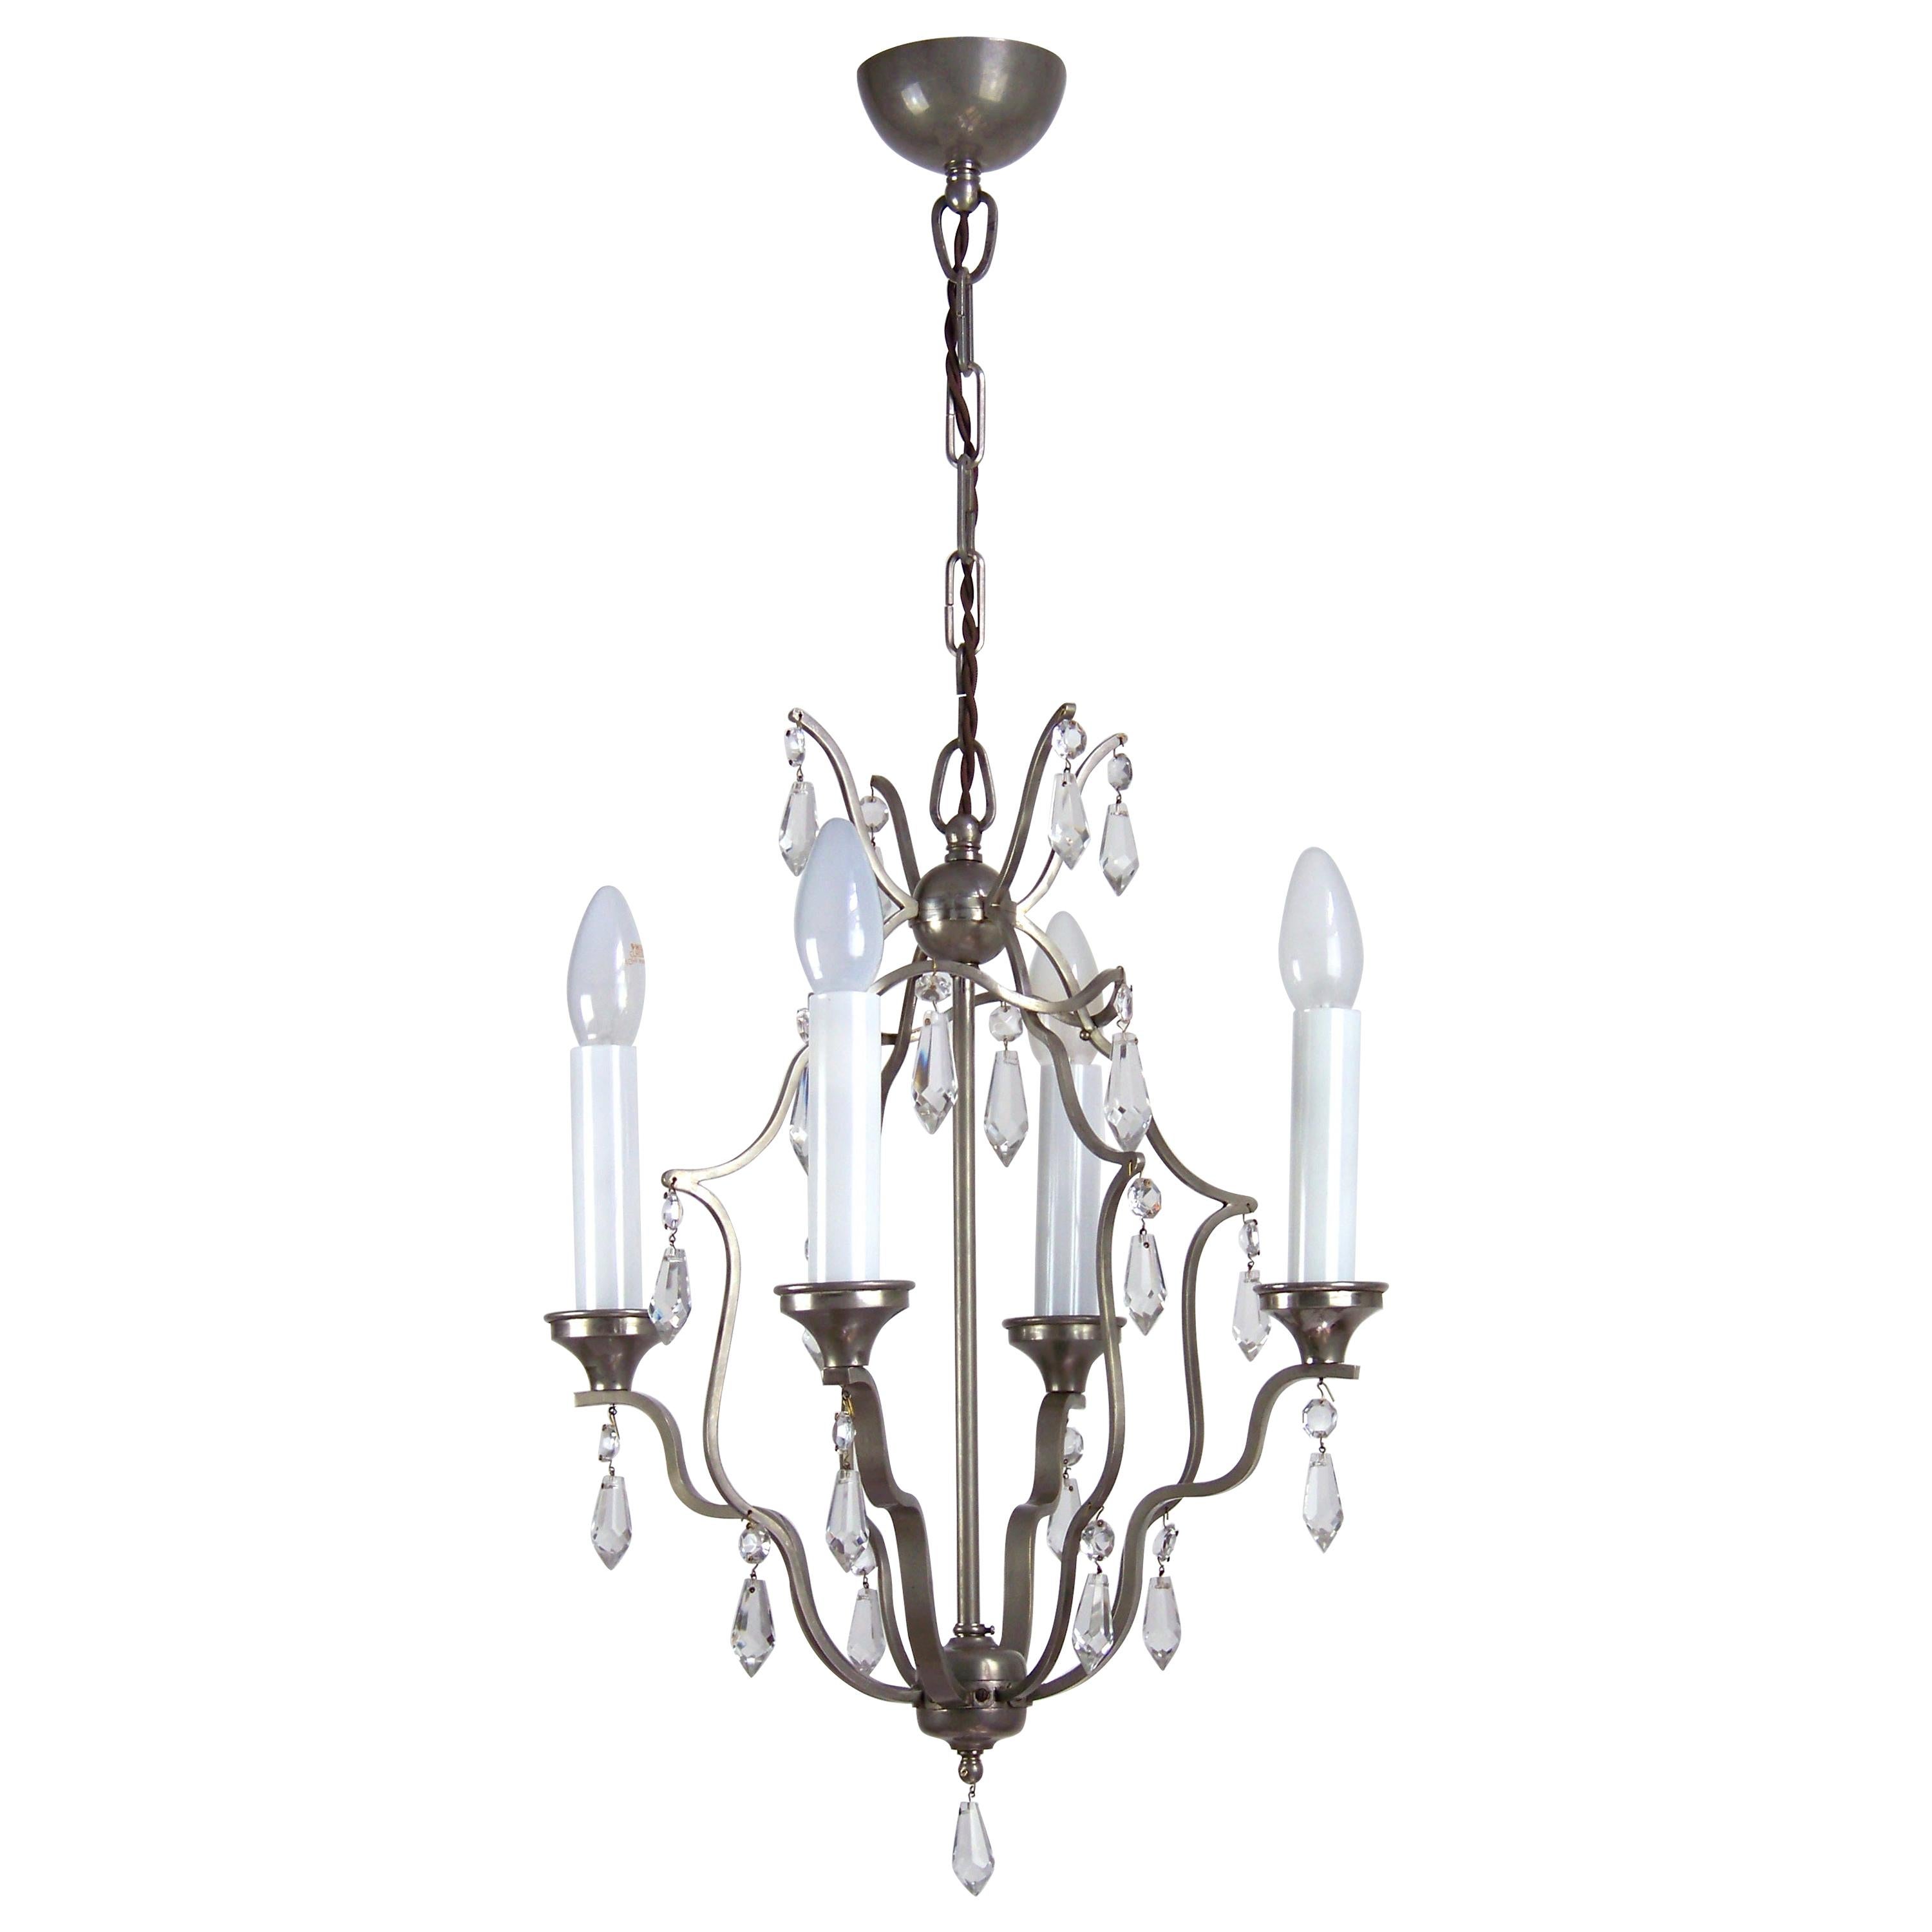 Chrome chandelier with glass trimmings, 1920ca For Sale